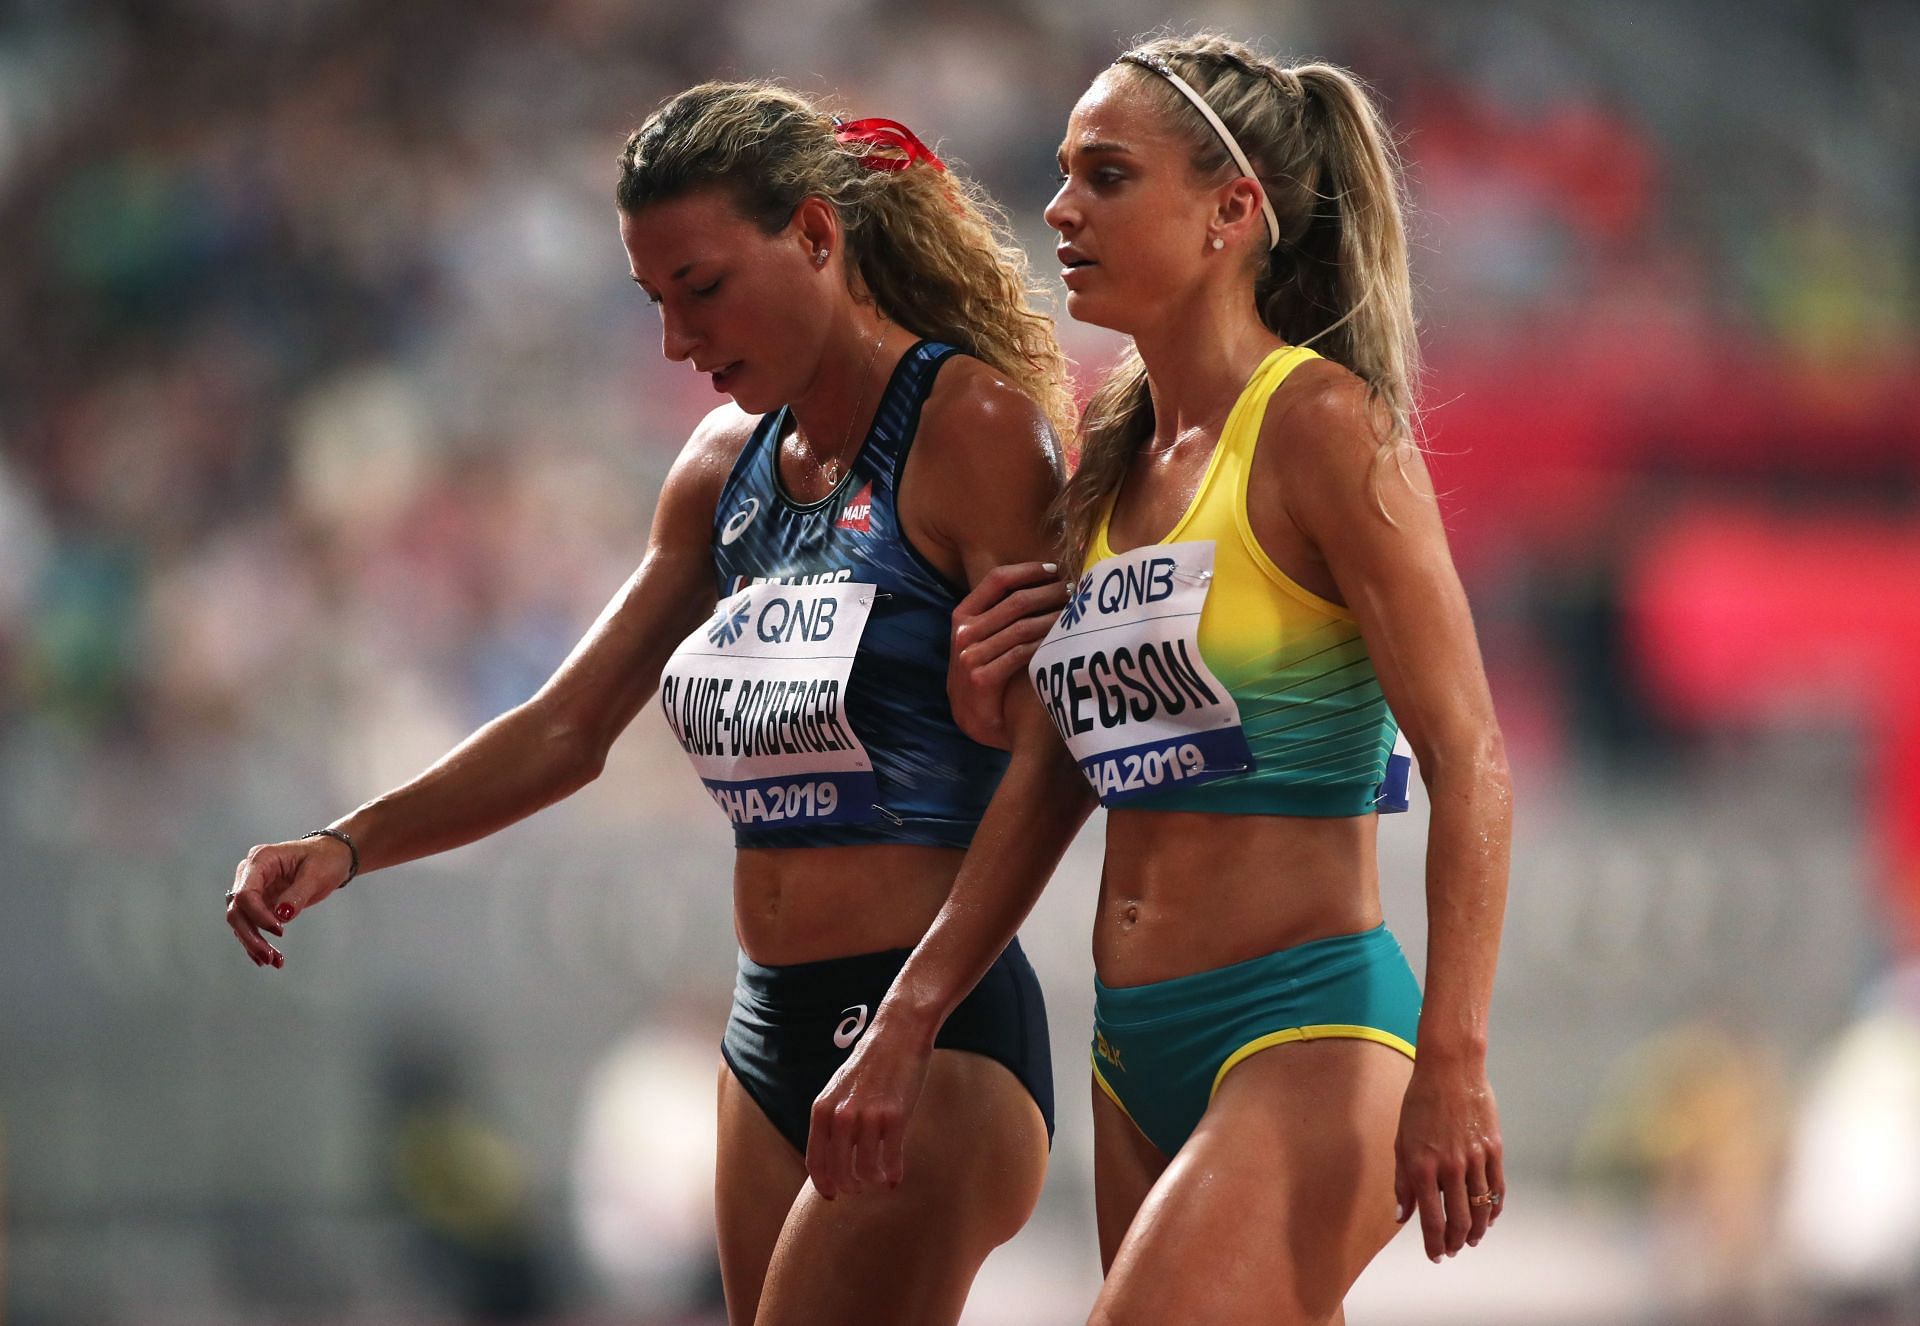 17th IAAF World Athletics Championships Doha 2019 - Ophelie Claude-Boxberger (L)